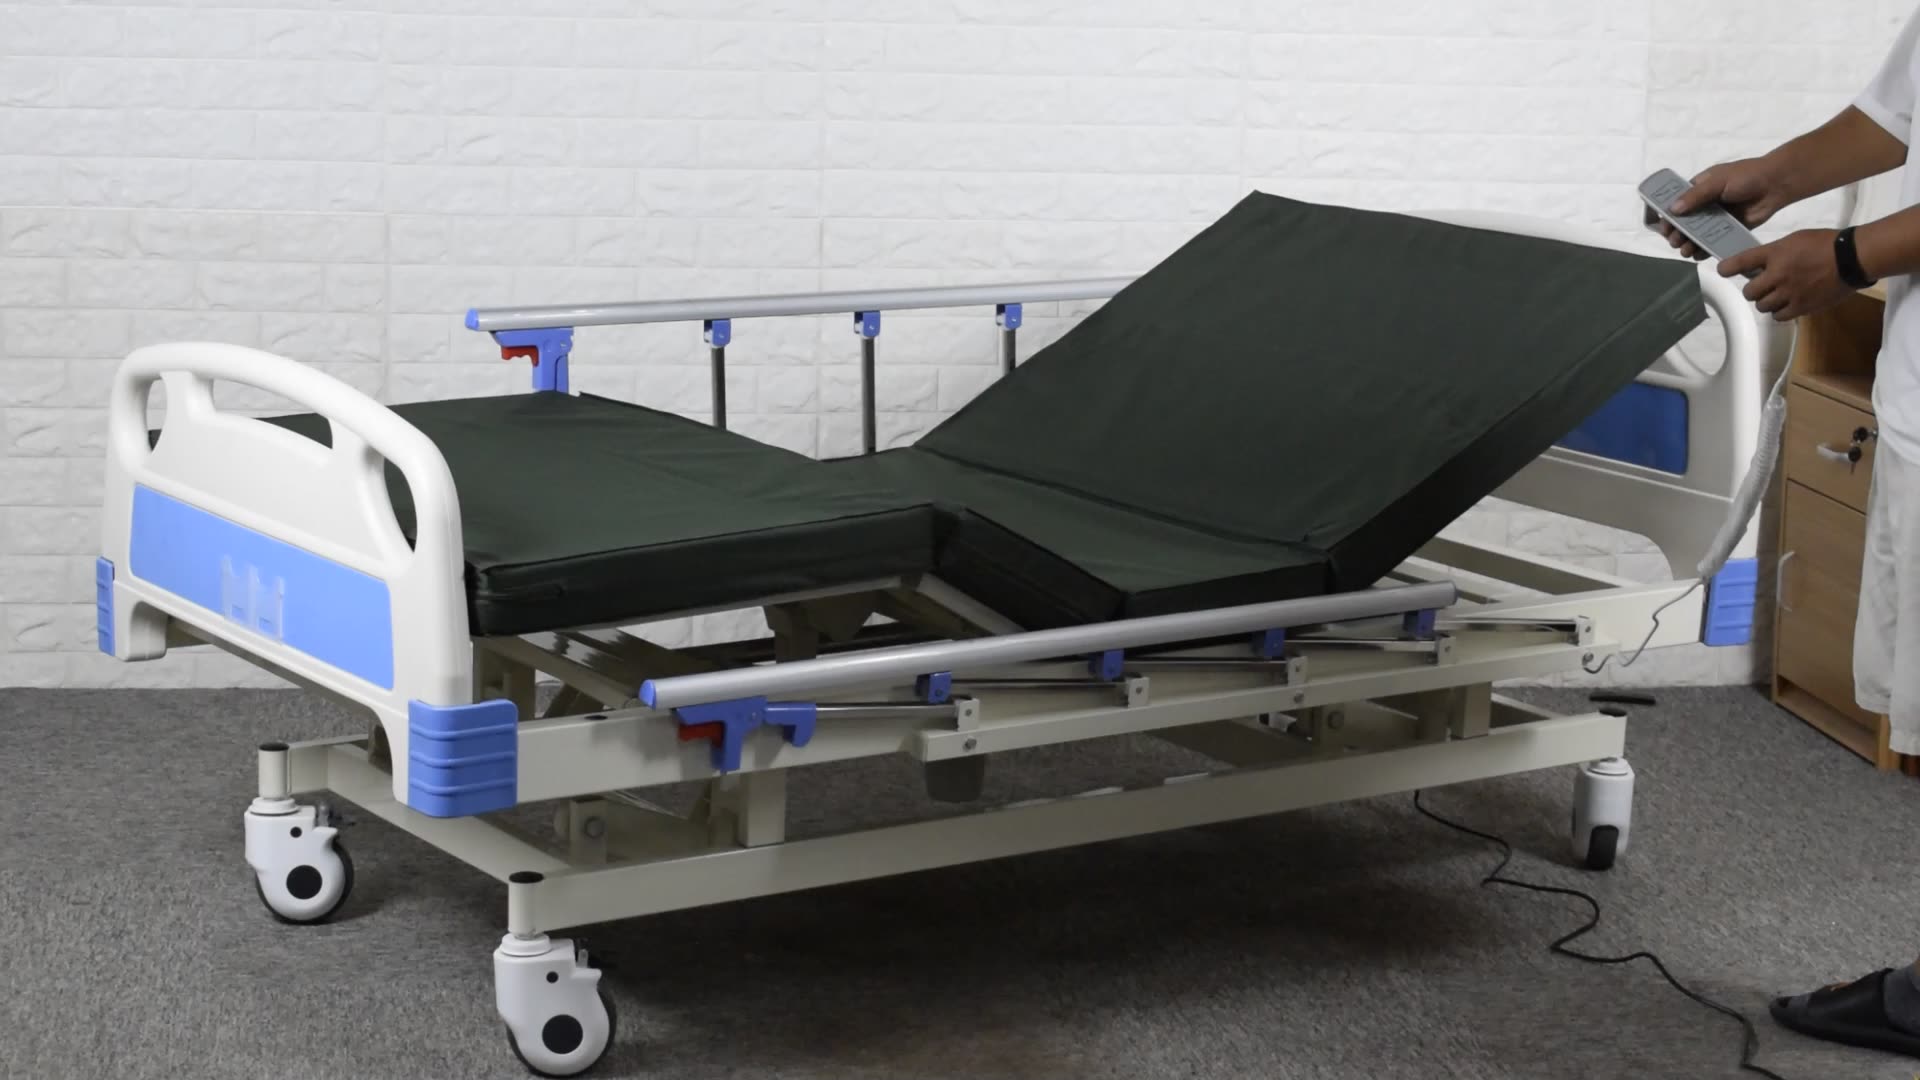 Adjustable medical equipment 3 function electric motorized hospital beds prices medical1